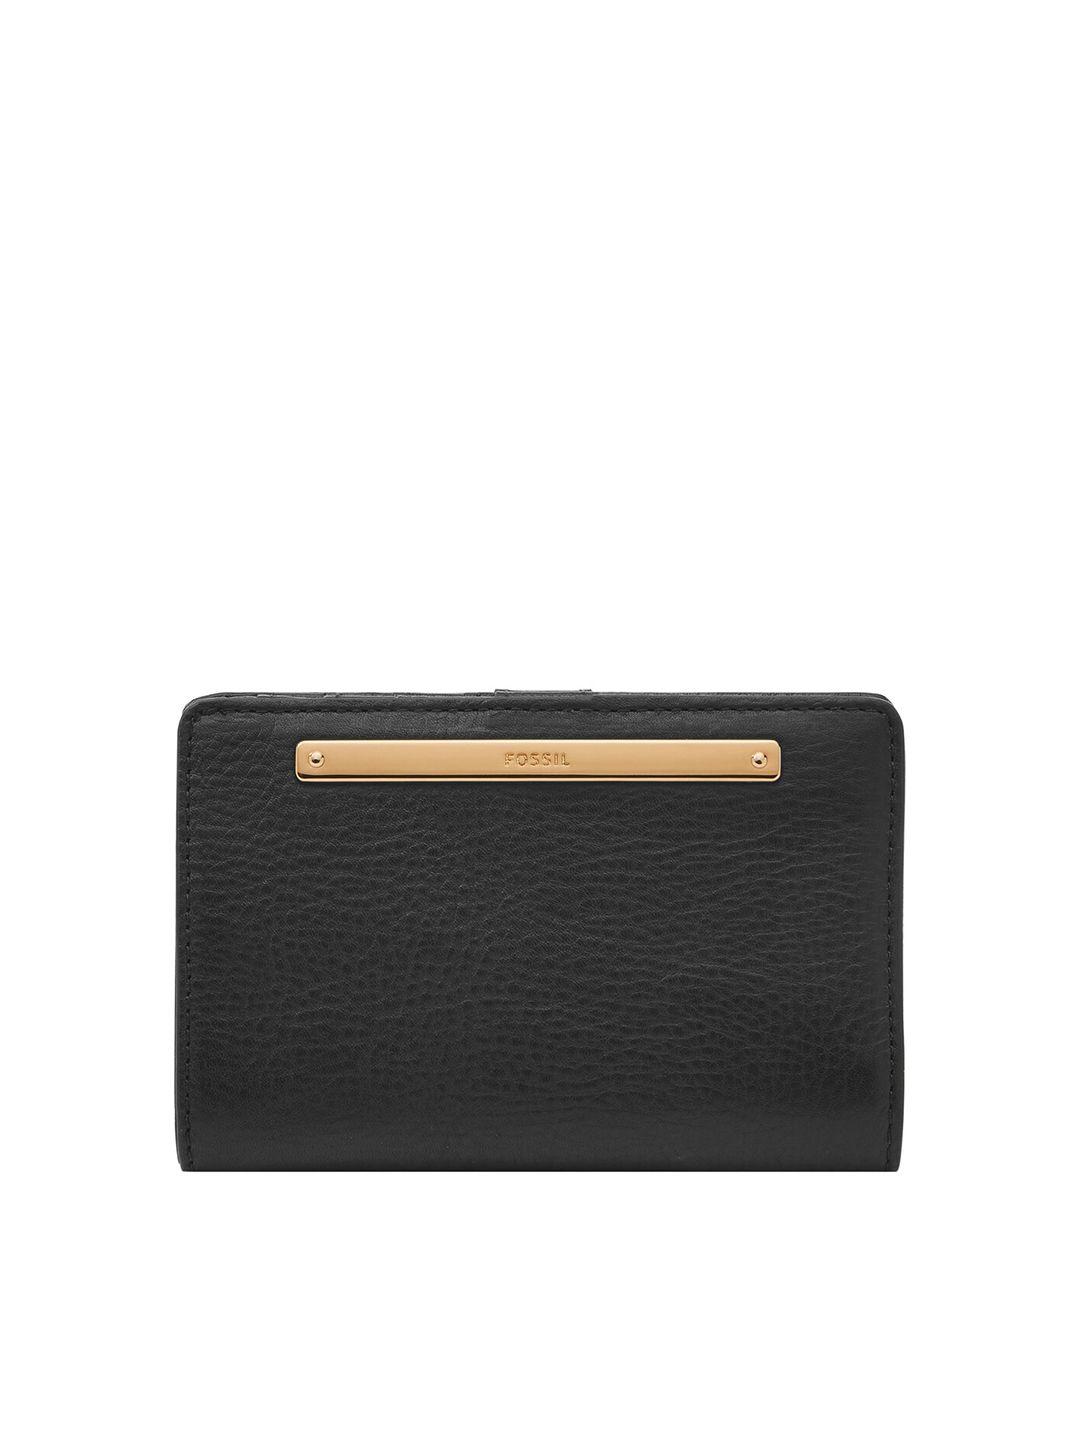 fossil-women-leather-two-fold-wallet-with-sd-card-holder